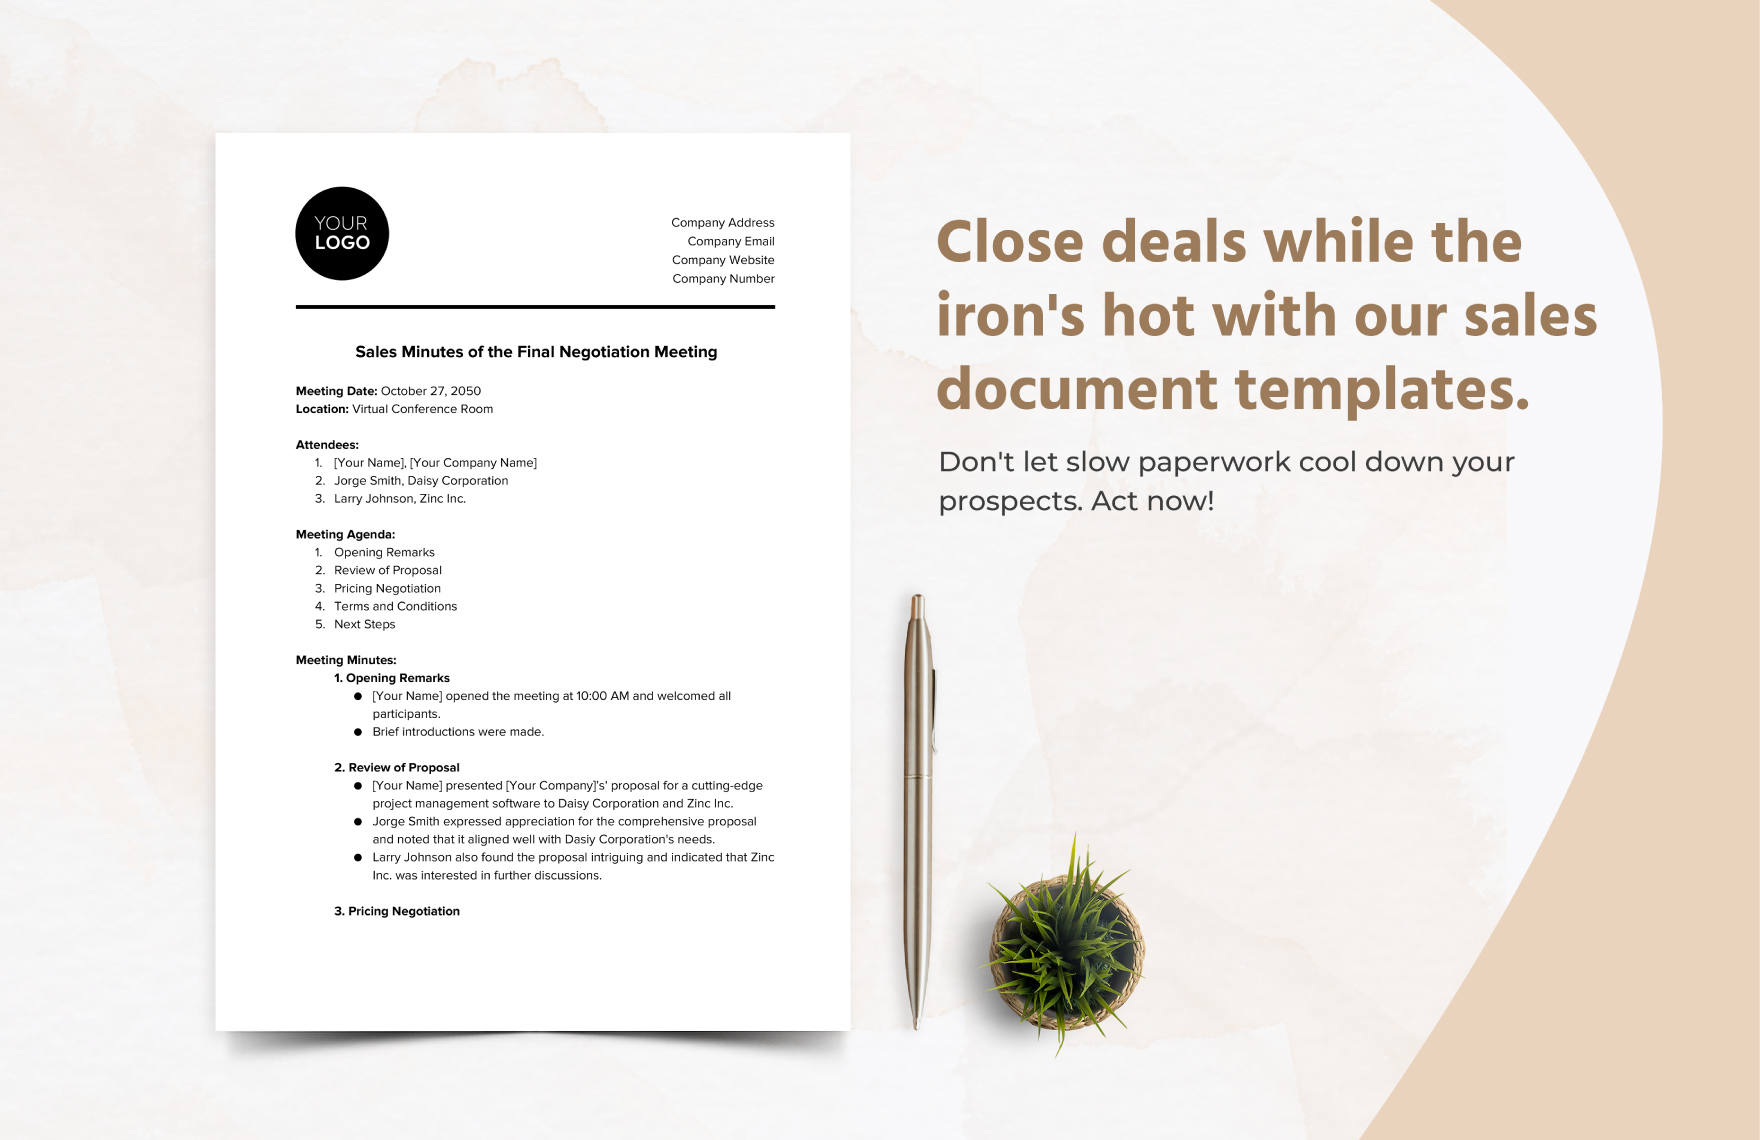 Sales Minute of Final Negotiation Meeting Template